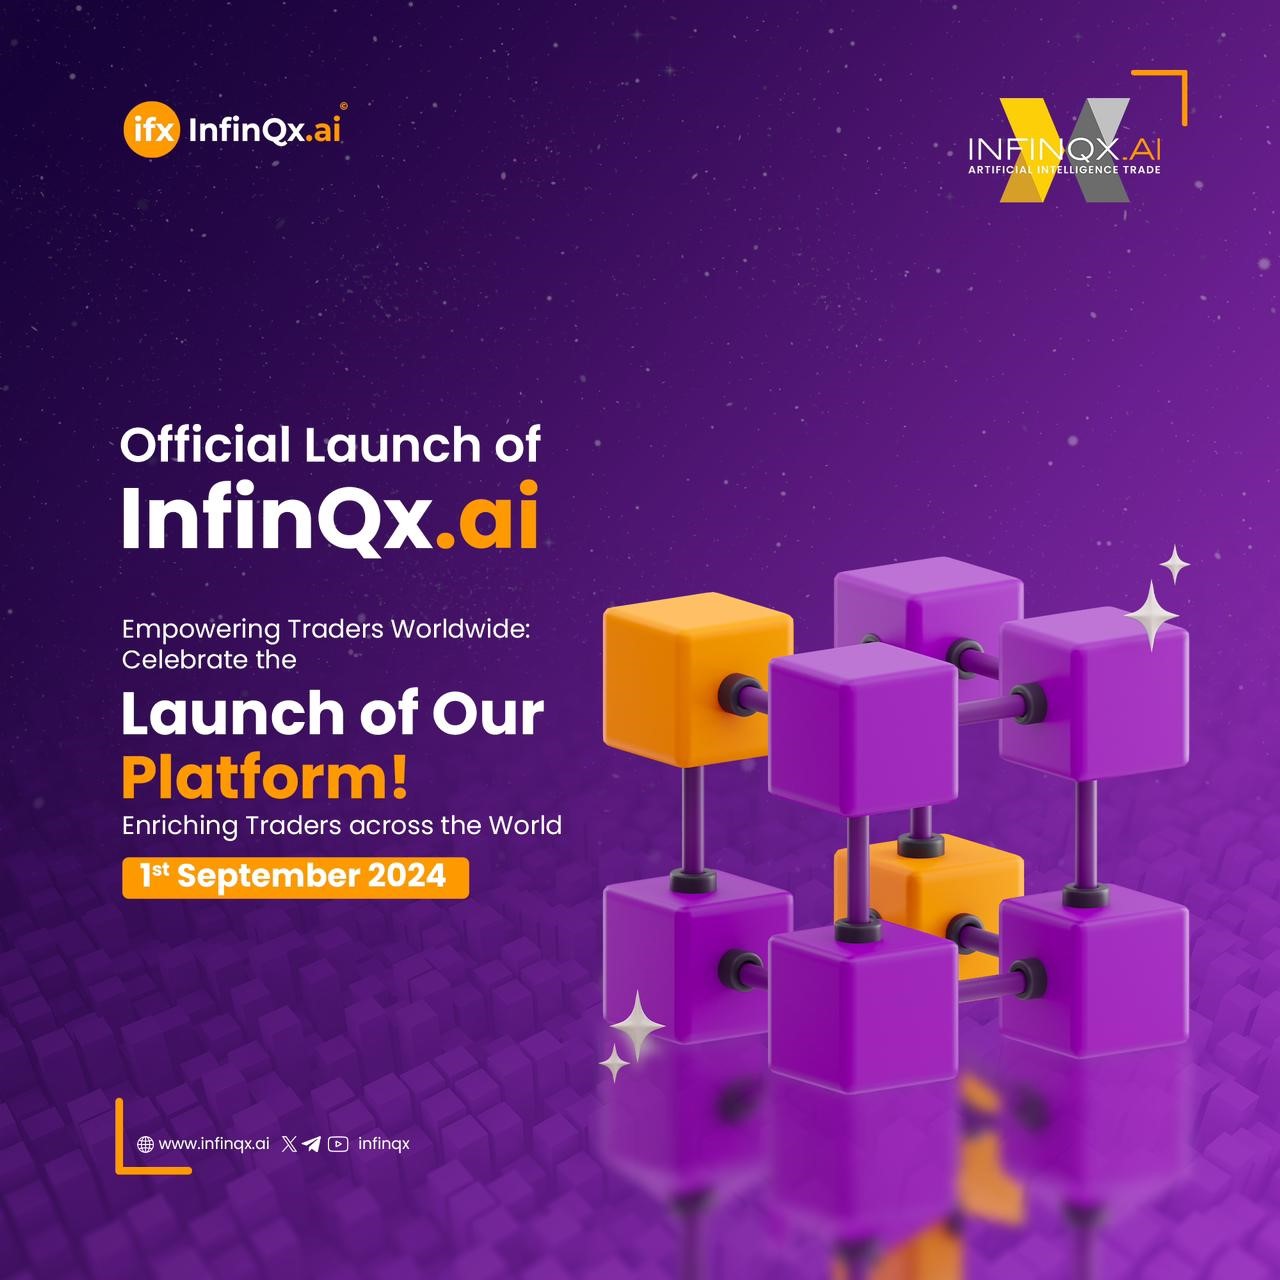 Celebrating the premiere: official launch of infinqx.ai trading platform